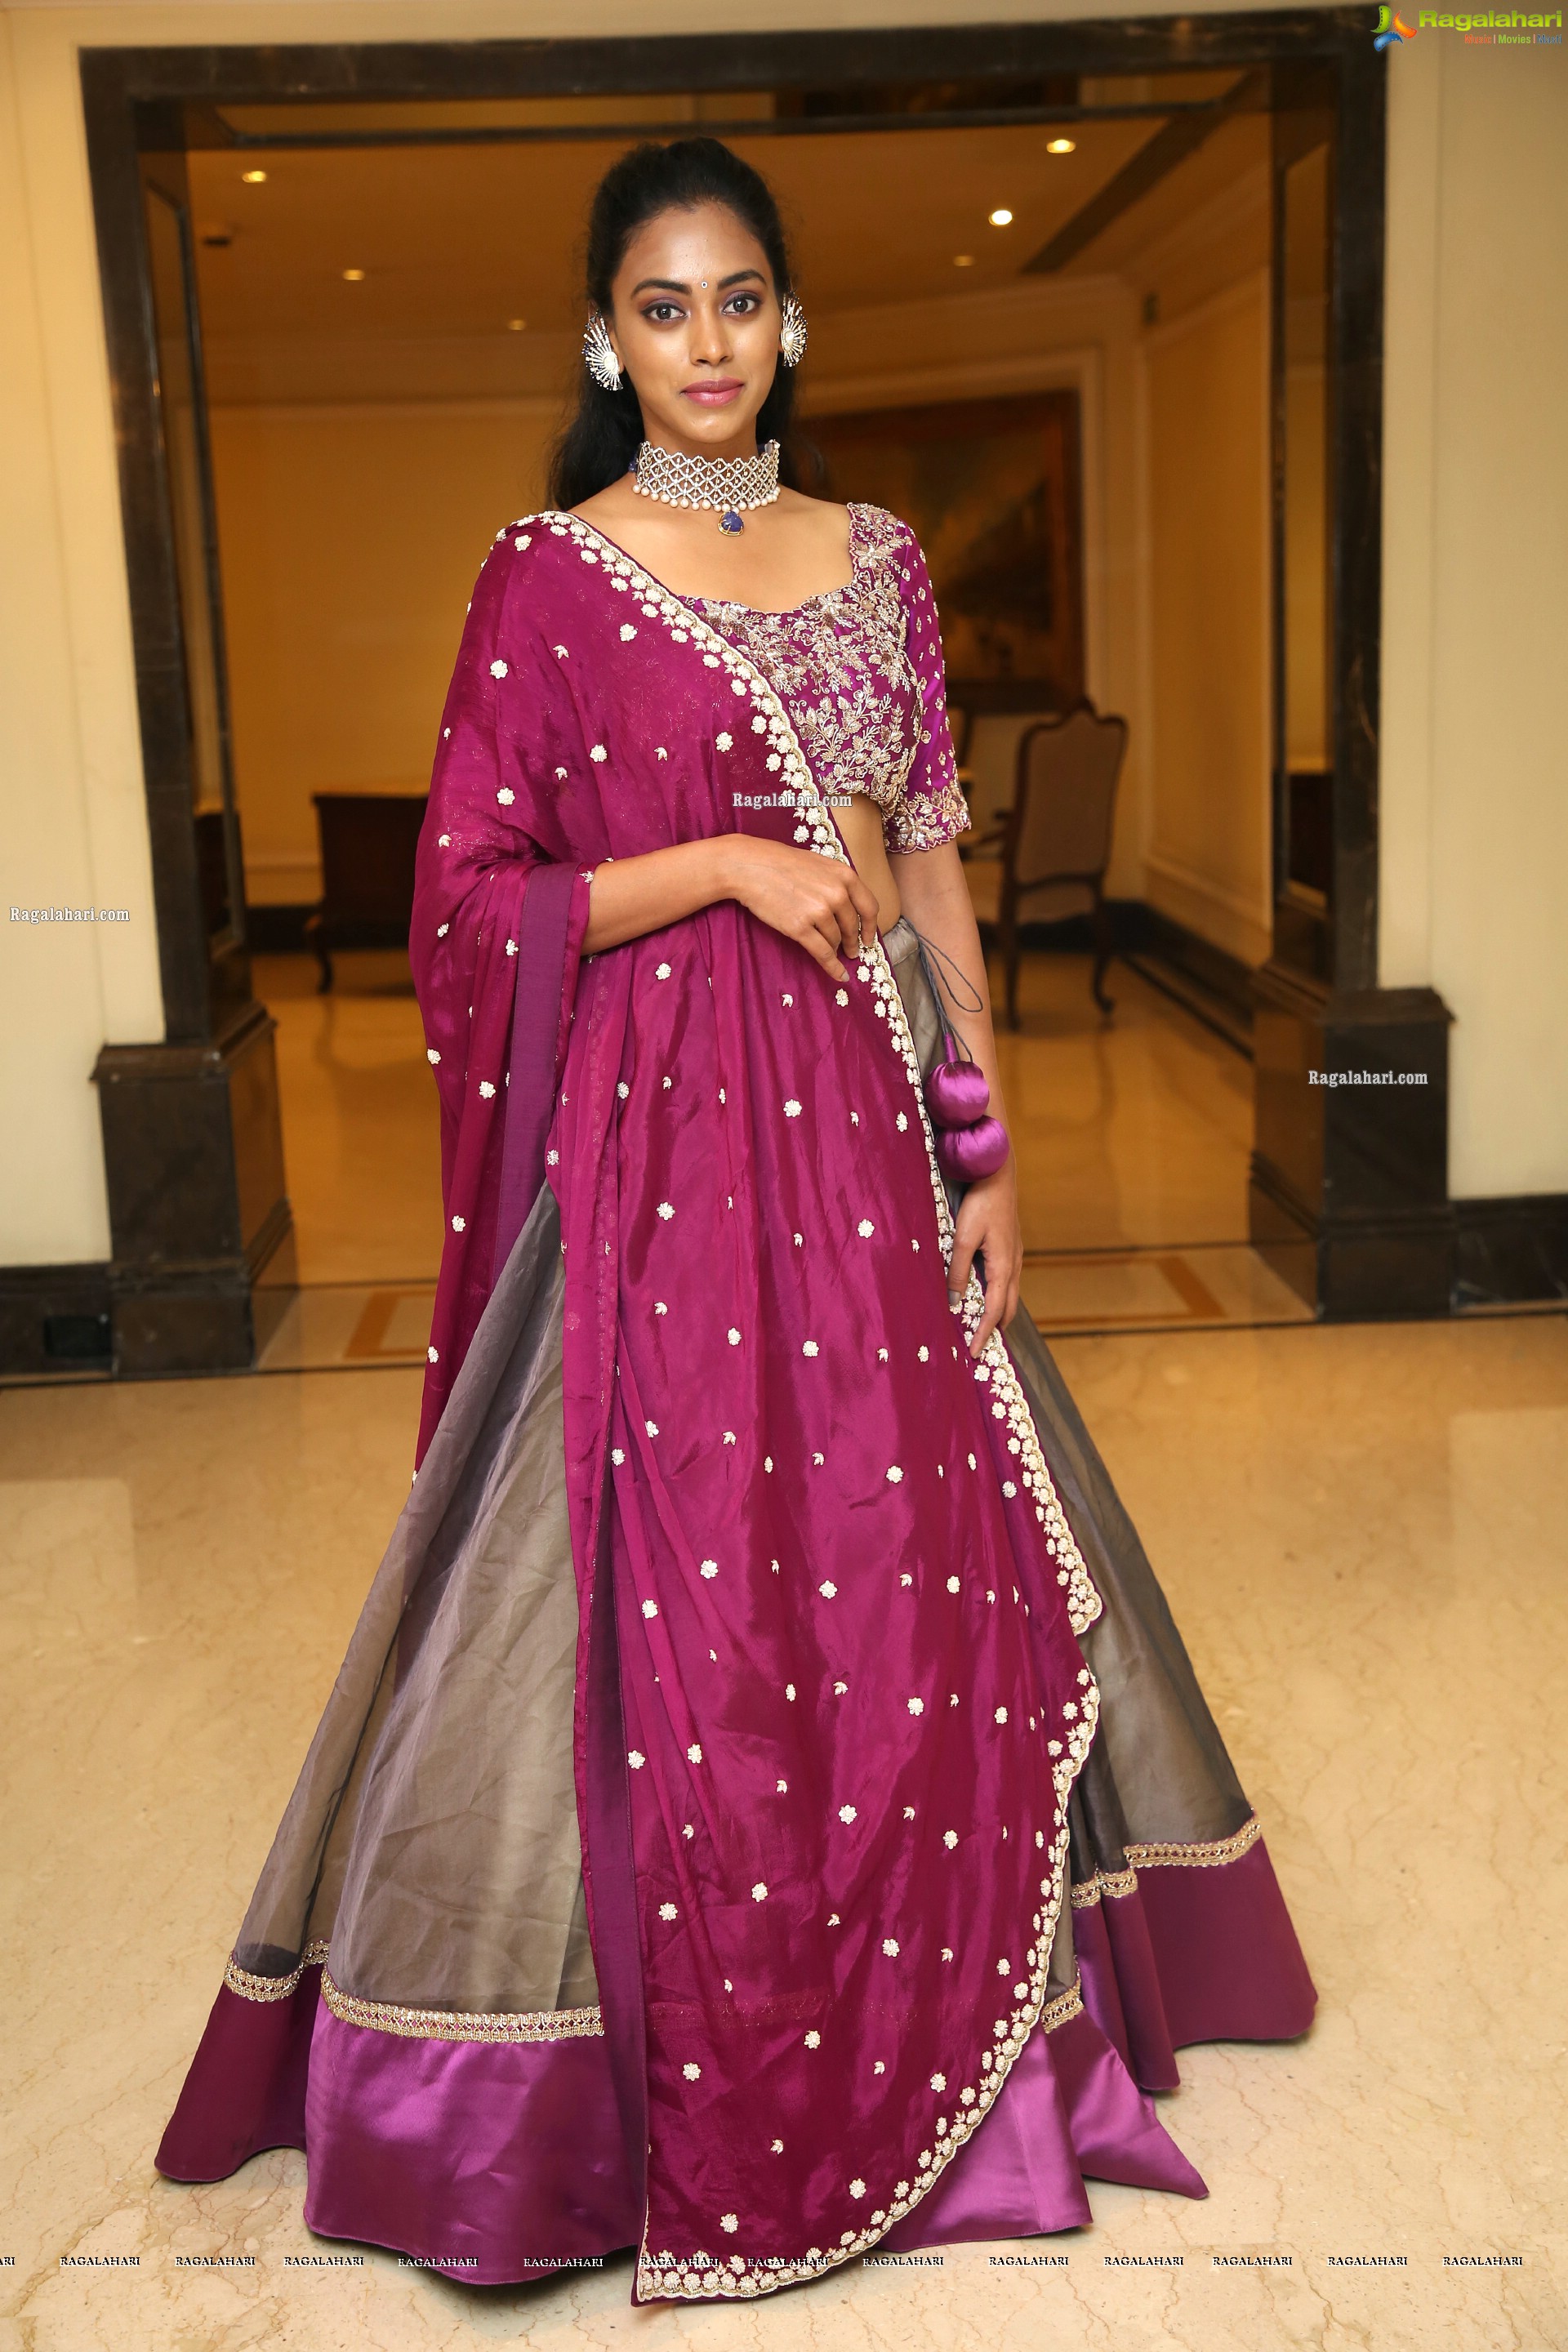 Kamakshi Bhaskarla Showcases a Collection at Zak Jewels Expo, HD Photo Gallery